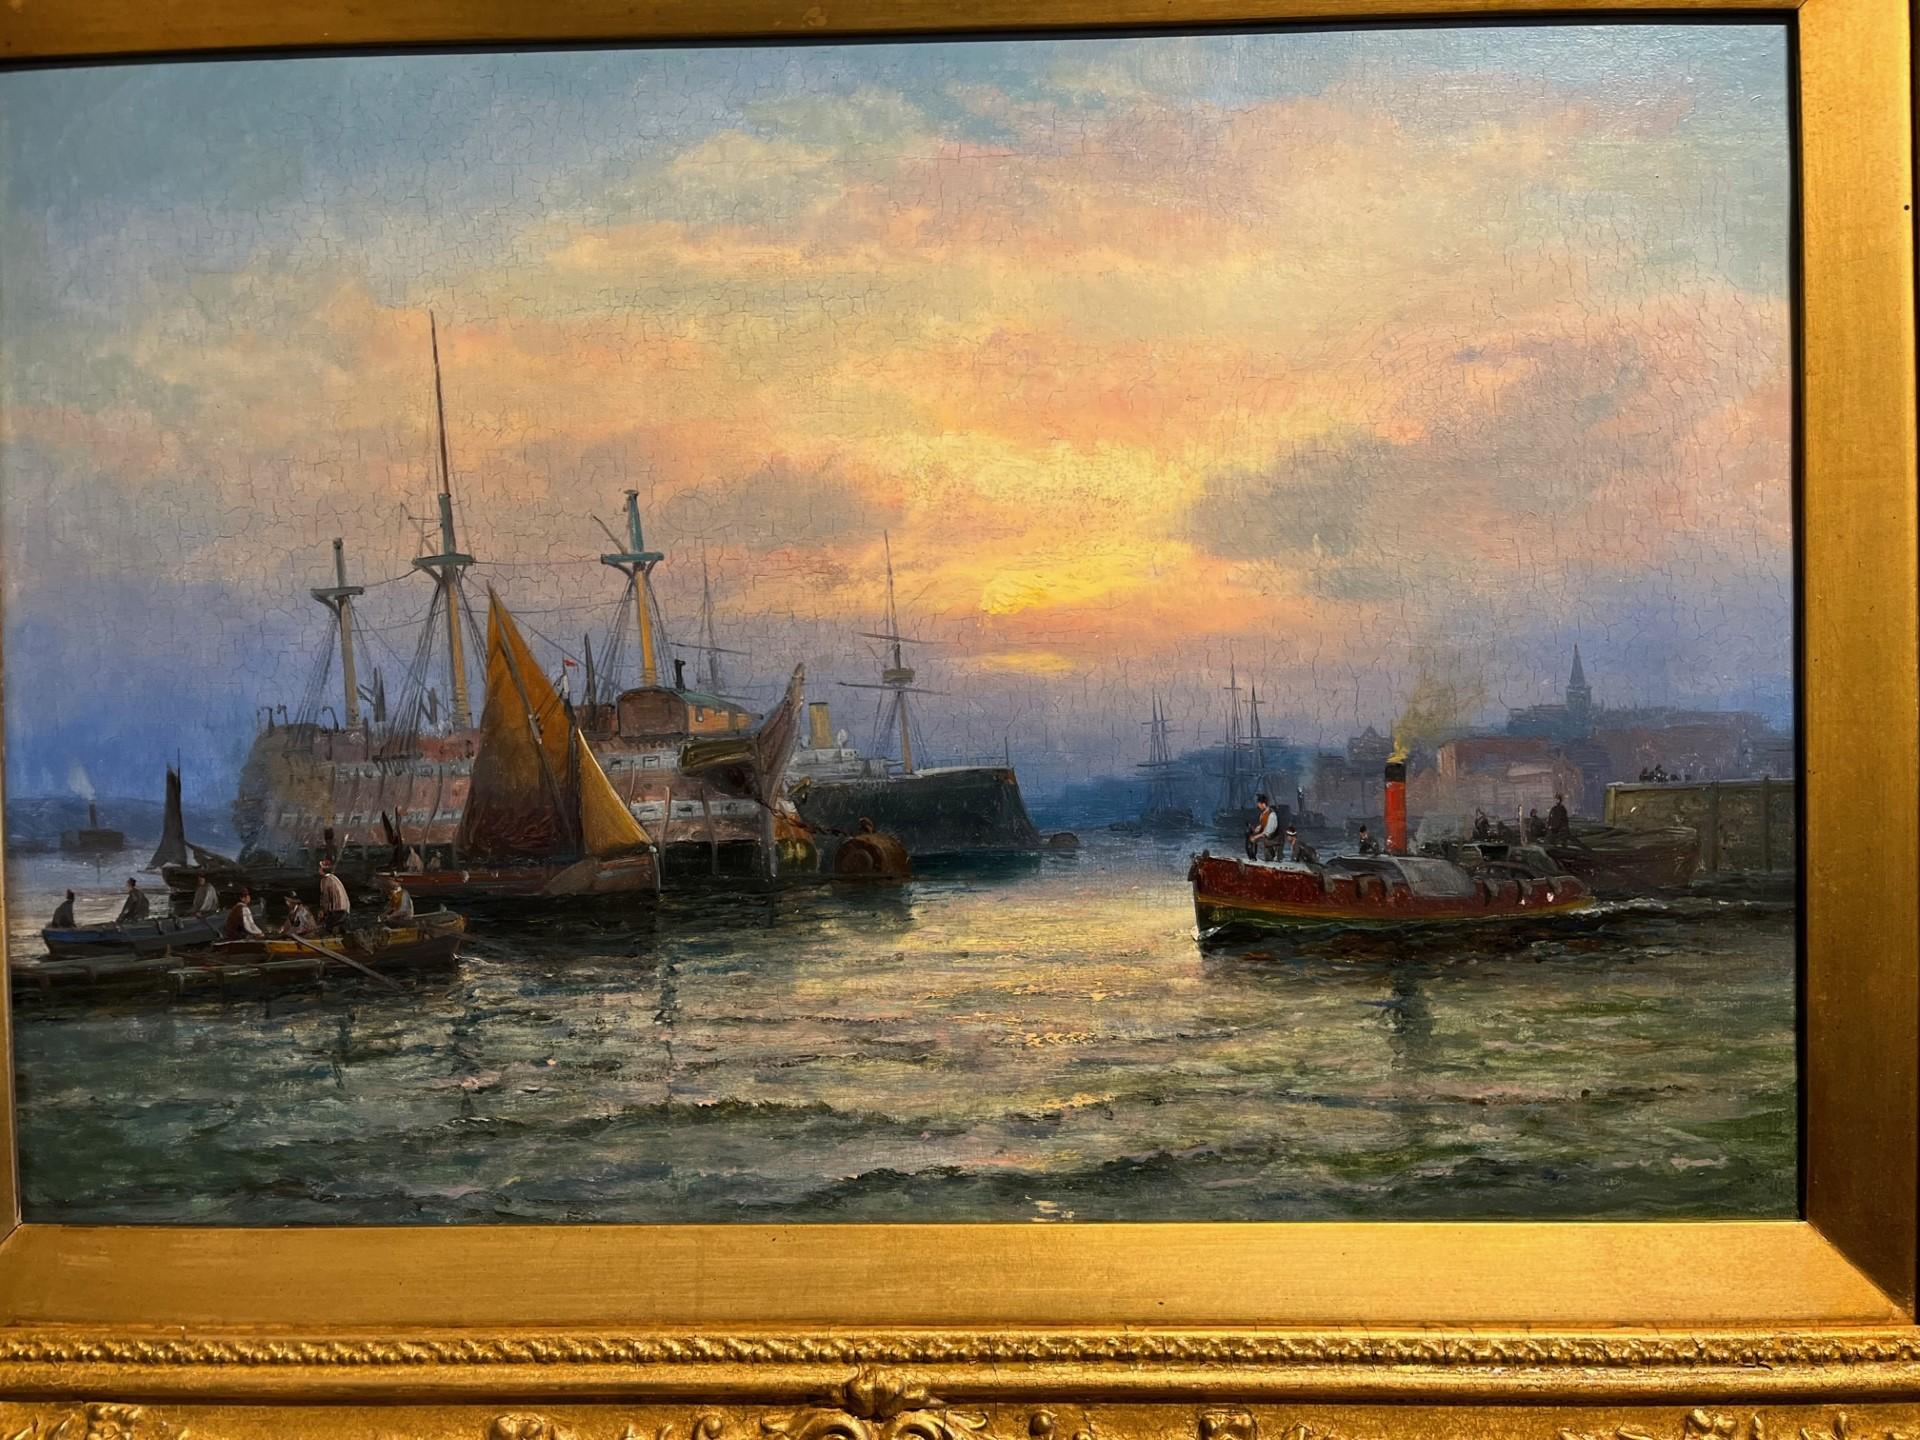 Old Prison Hulk at Sunset on the Medway, England and other shipping Oil Painting (peinture à l'huile) - Victorien Art par William Thornley